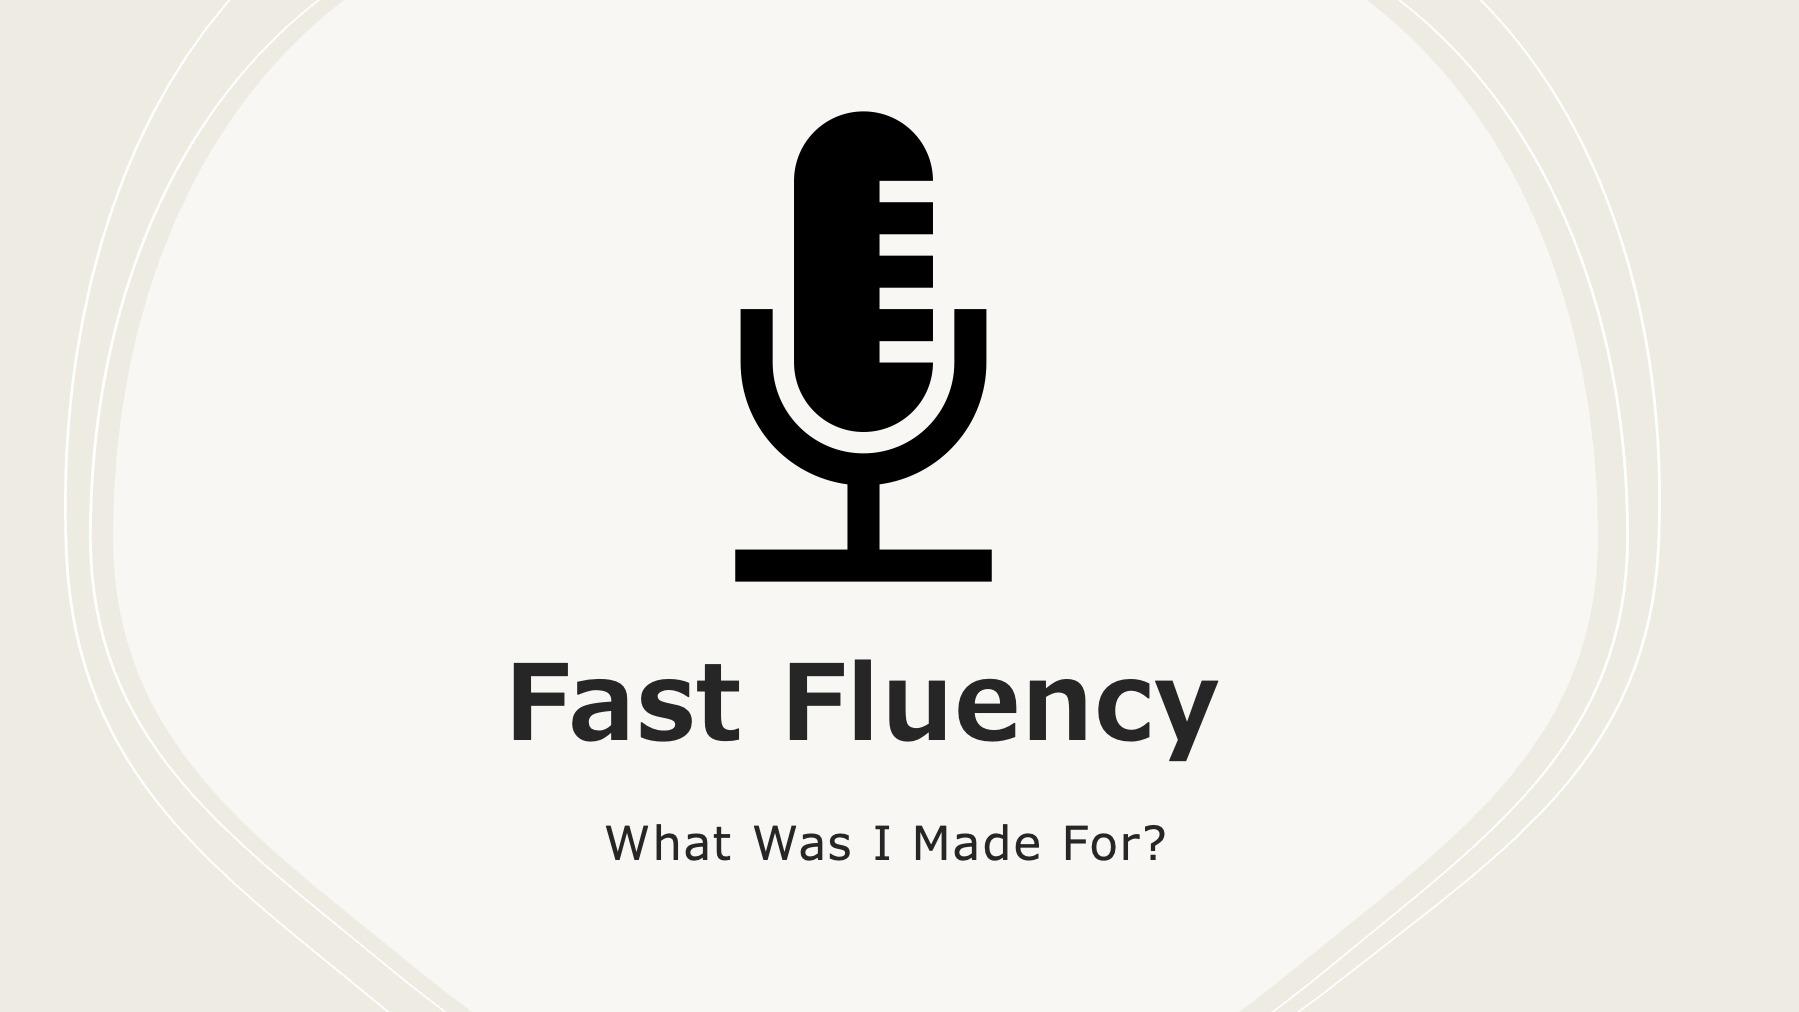 Fast Fluency: What Was I Made For?